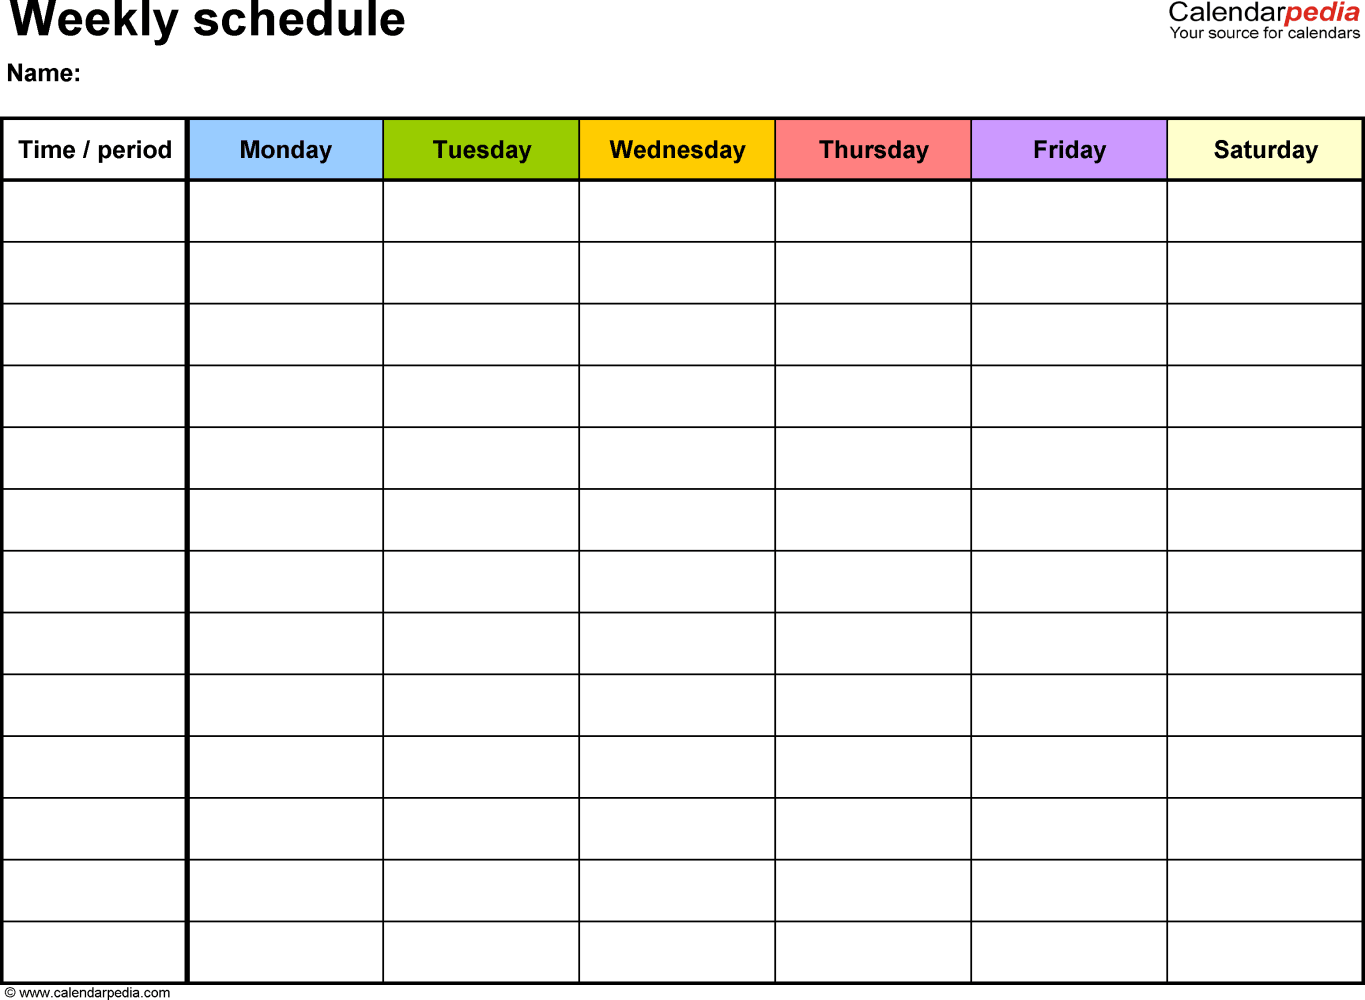 Monthly Work Schedule Template 26+ Free Word, Excel, PDF Format 